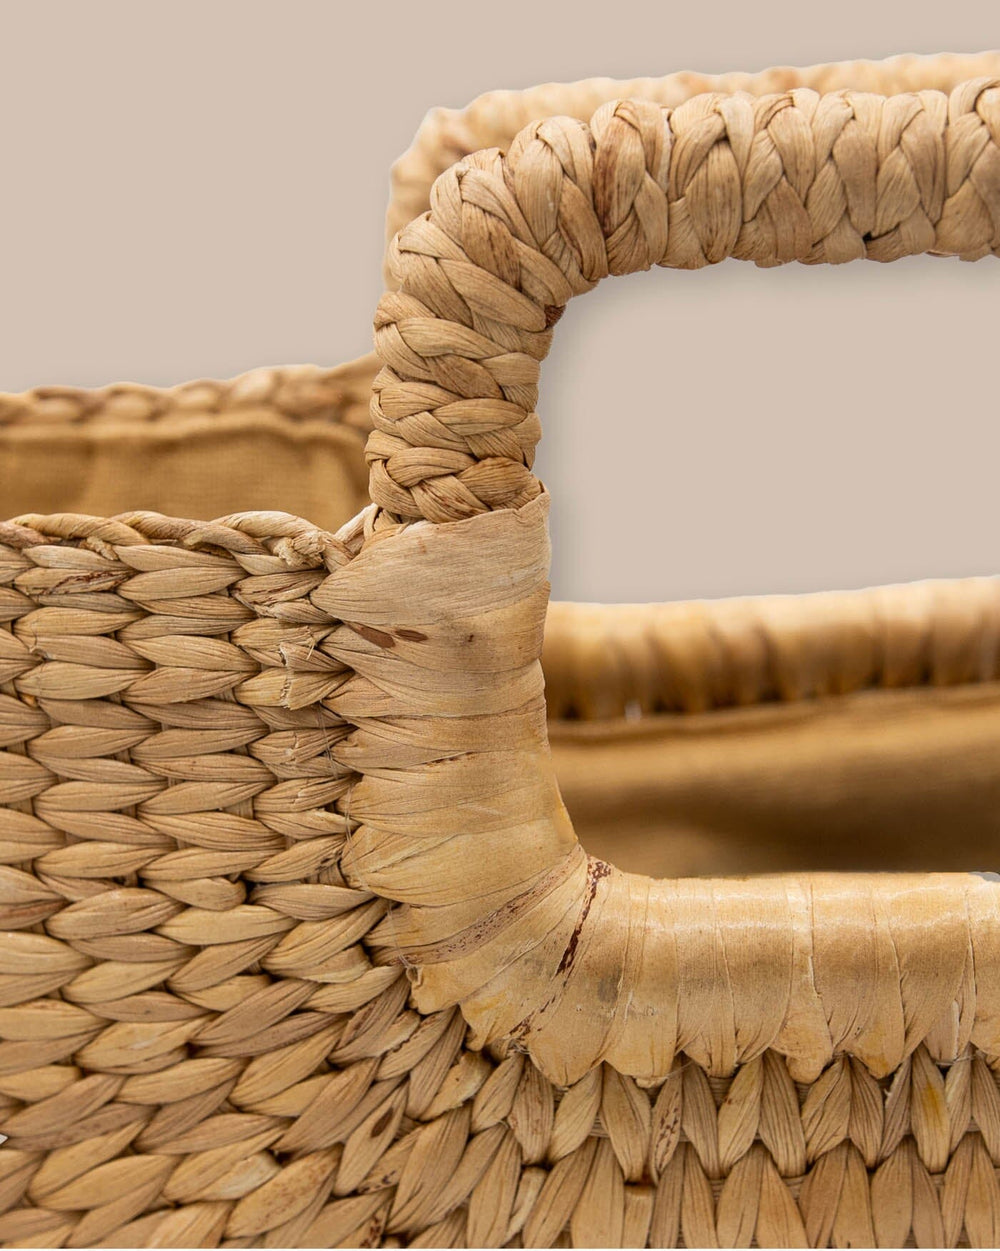 The detail view of the Southern Tide Mini Straw Bag by Southern Tide - Natural